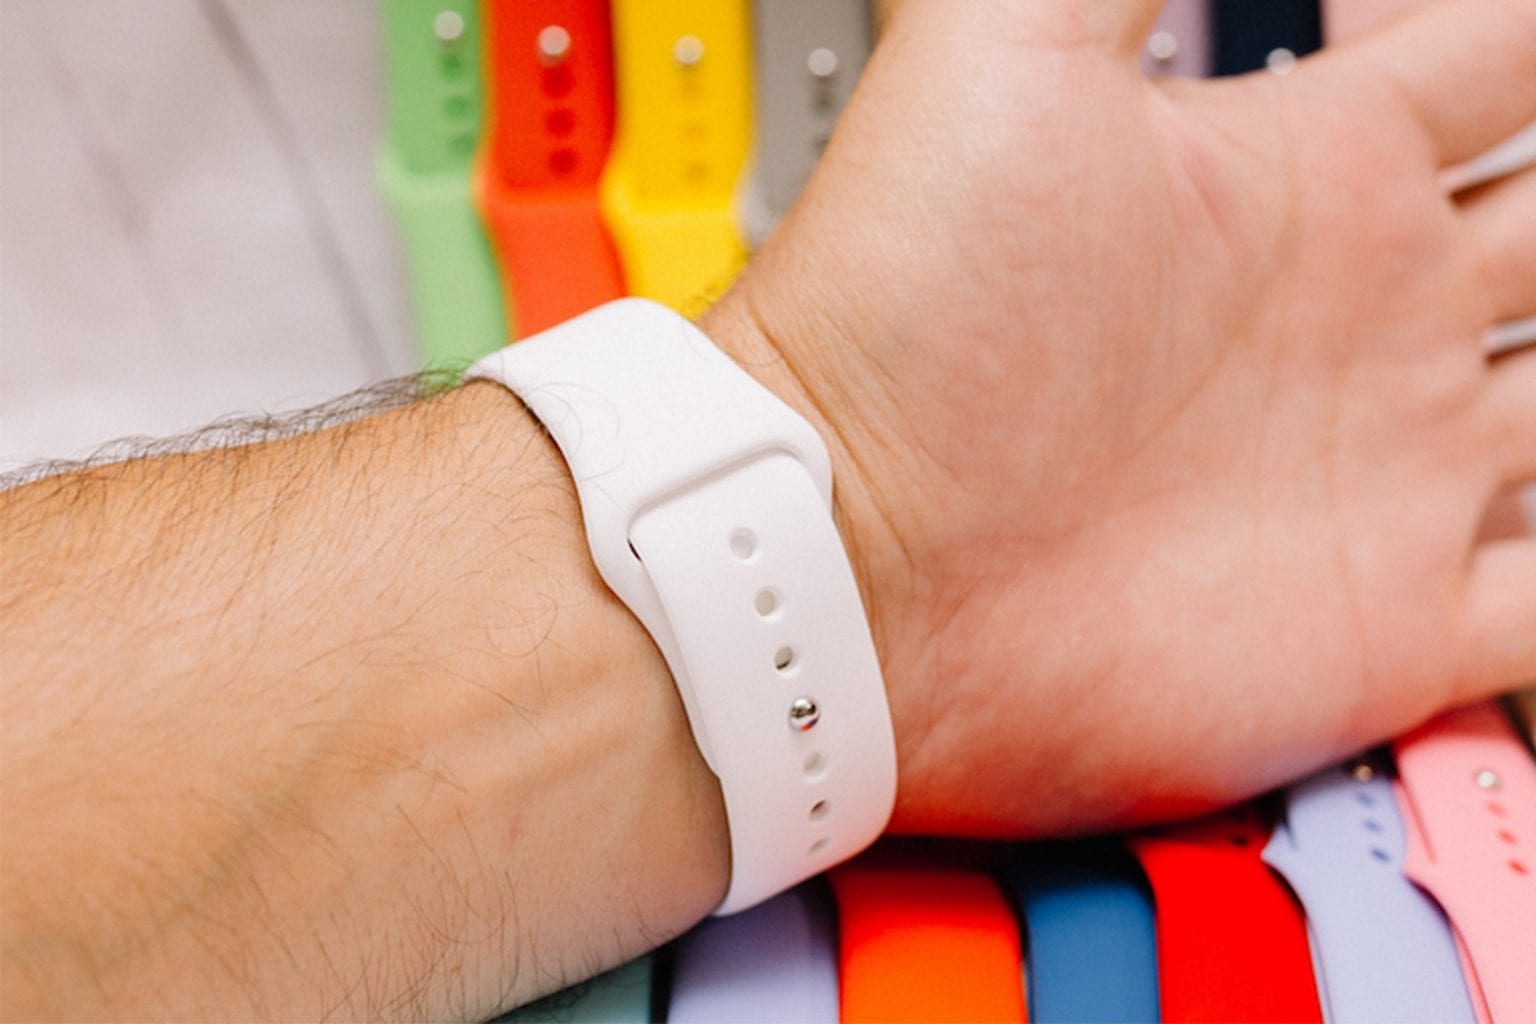 This silicone Apple Watch band is only $12.99